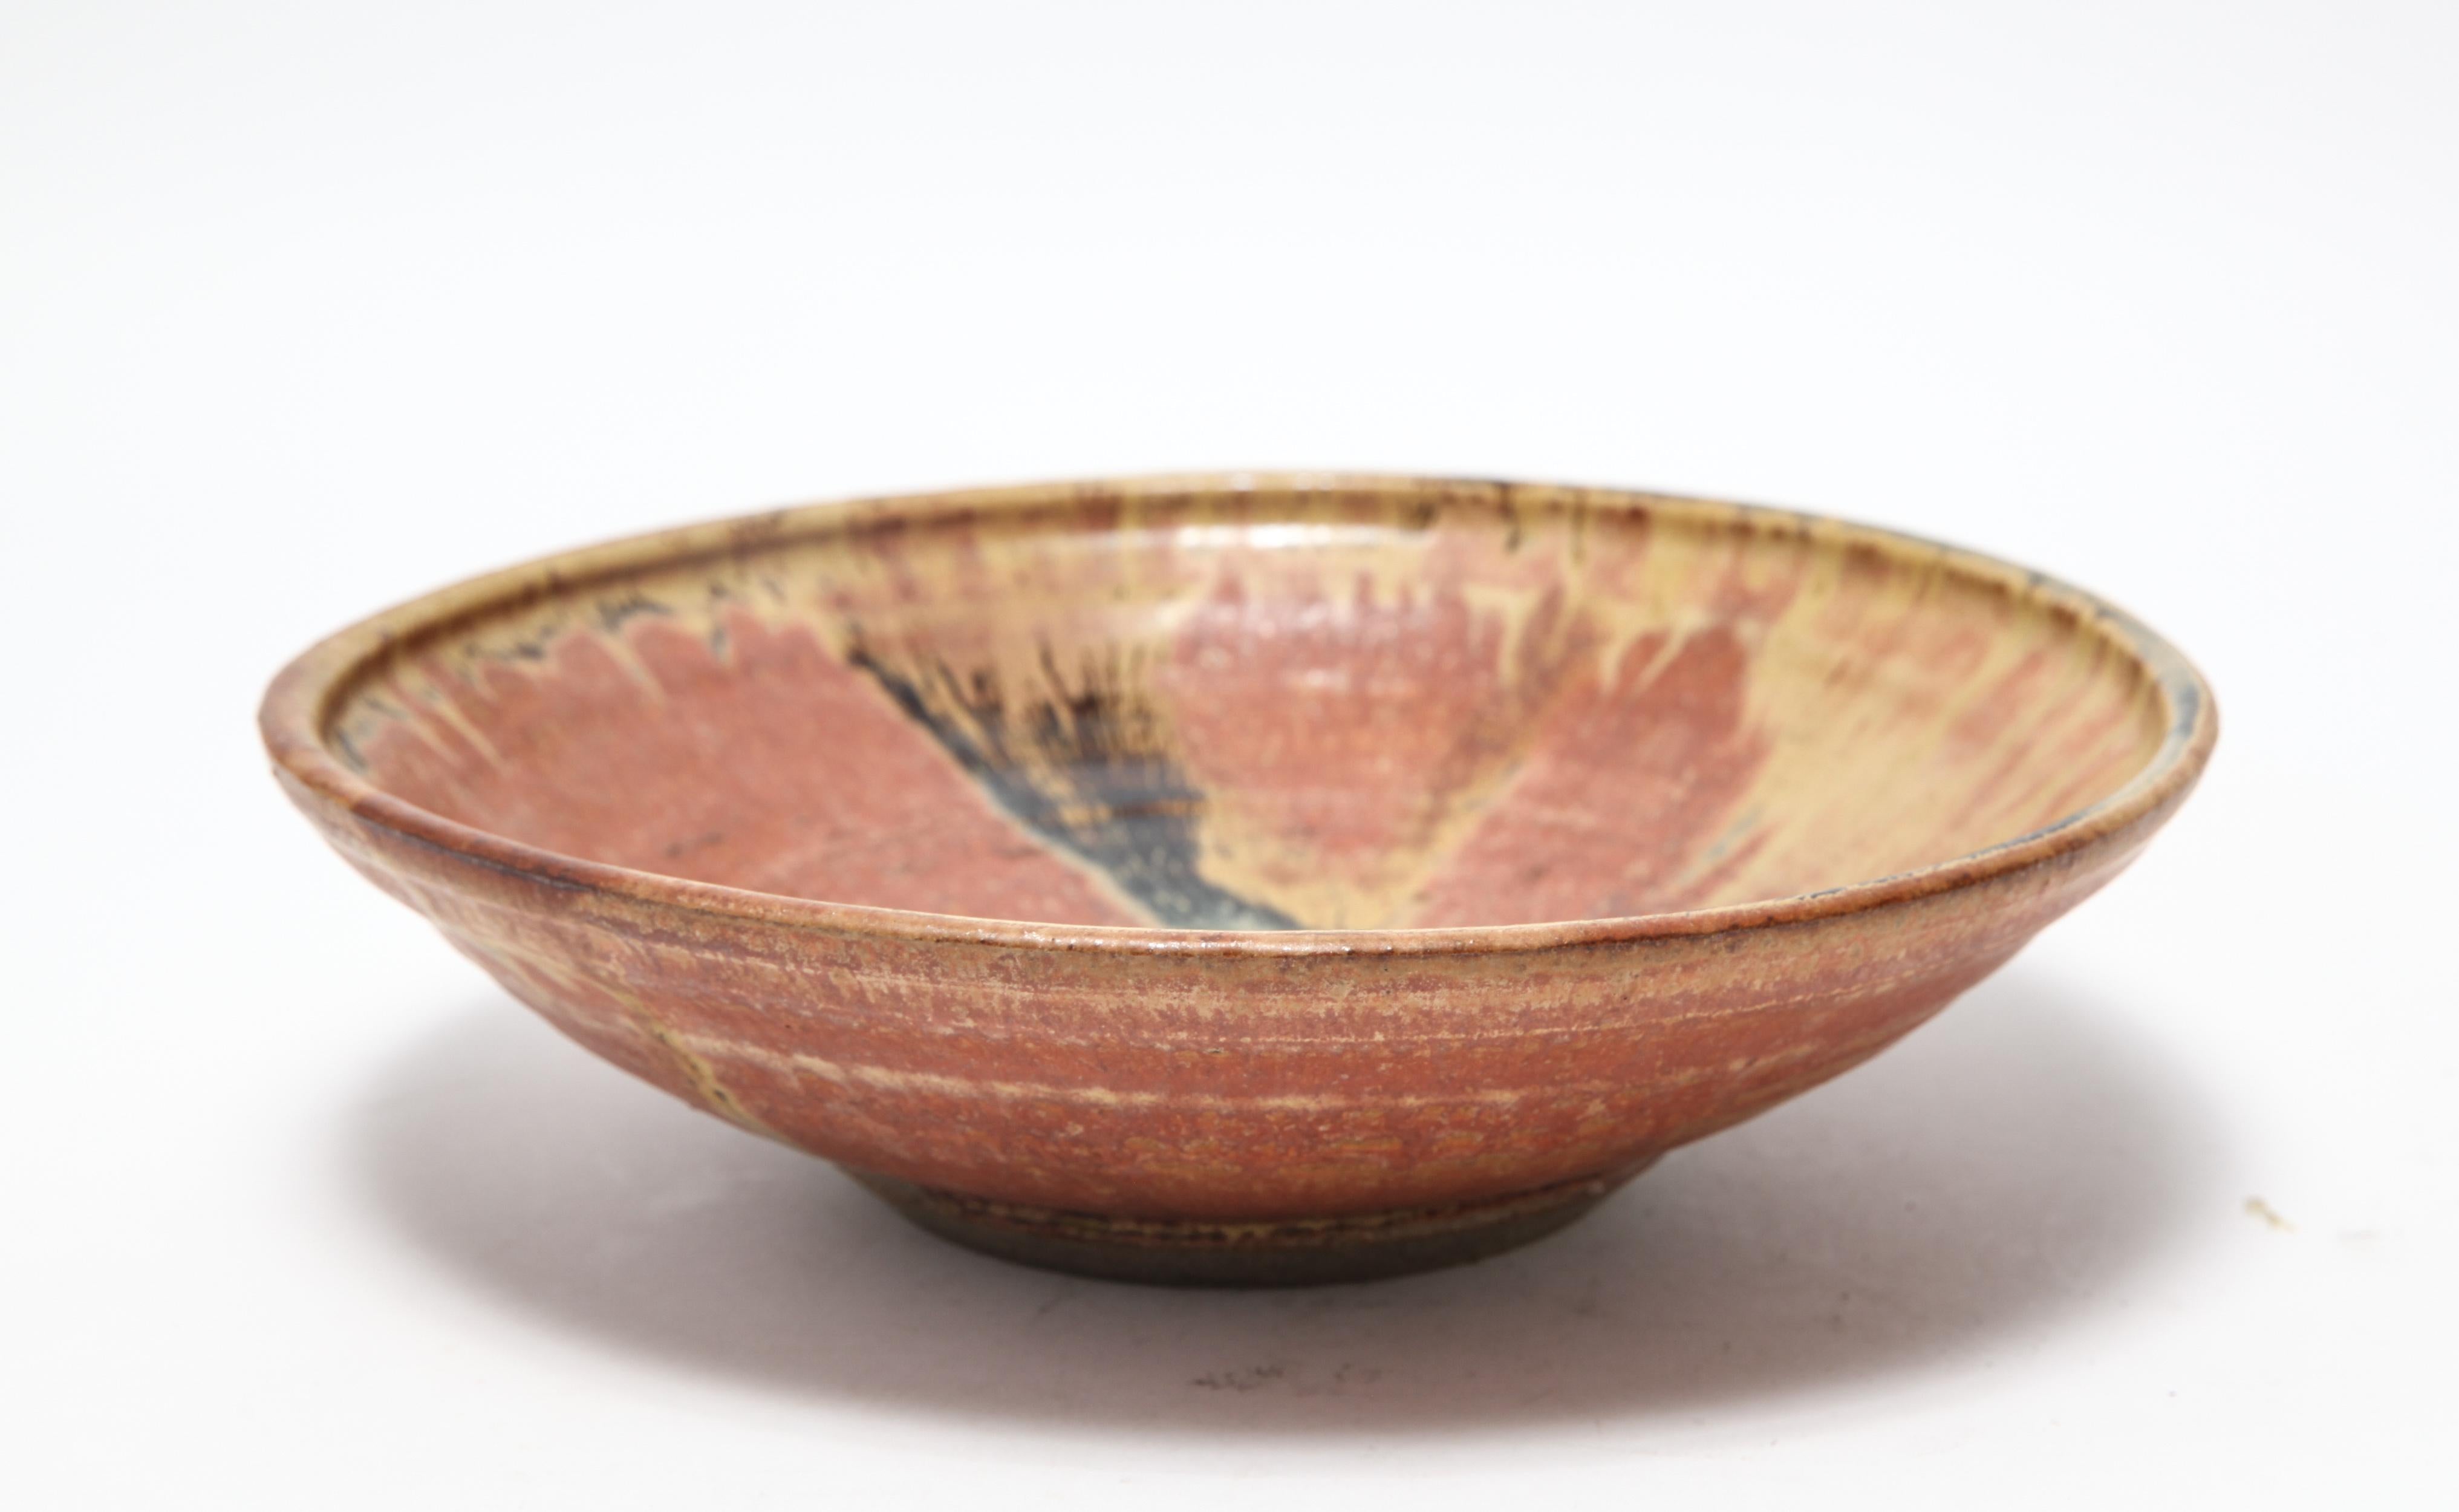 American Mid-Century Modern stoneware art pottery footed bowl designed by Karen Karnes (American, 1925-2016) with burnt orange, ochre, and brown glazes. The piece is signed with an impressed artist's monogram 